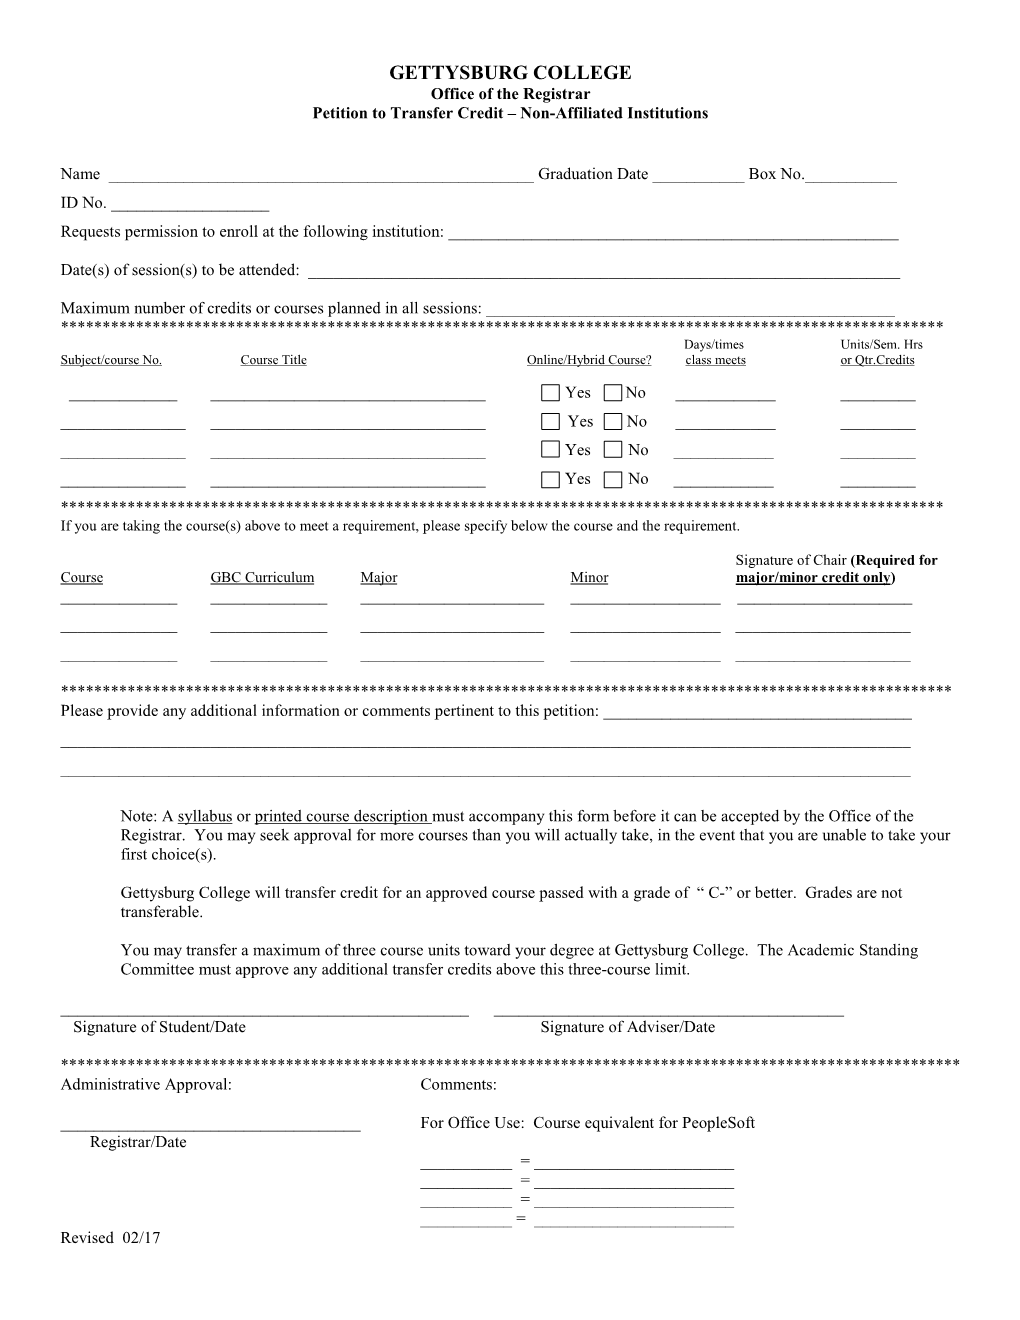 Transfer of Credit Petition Form Available at the Office of the Registrar